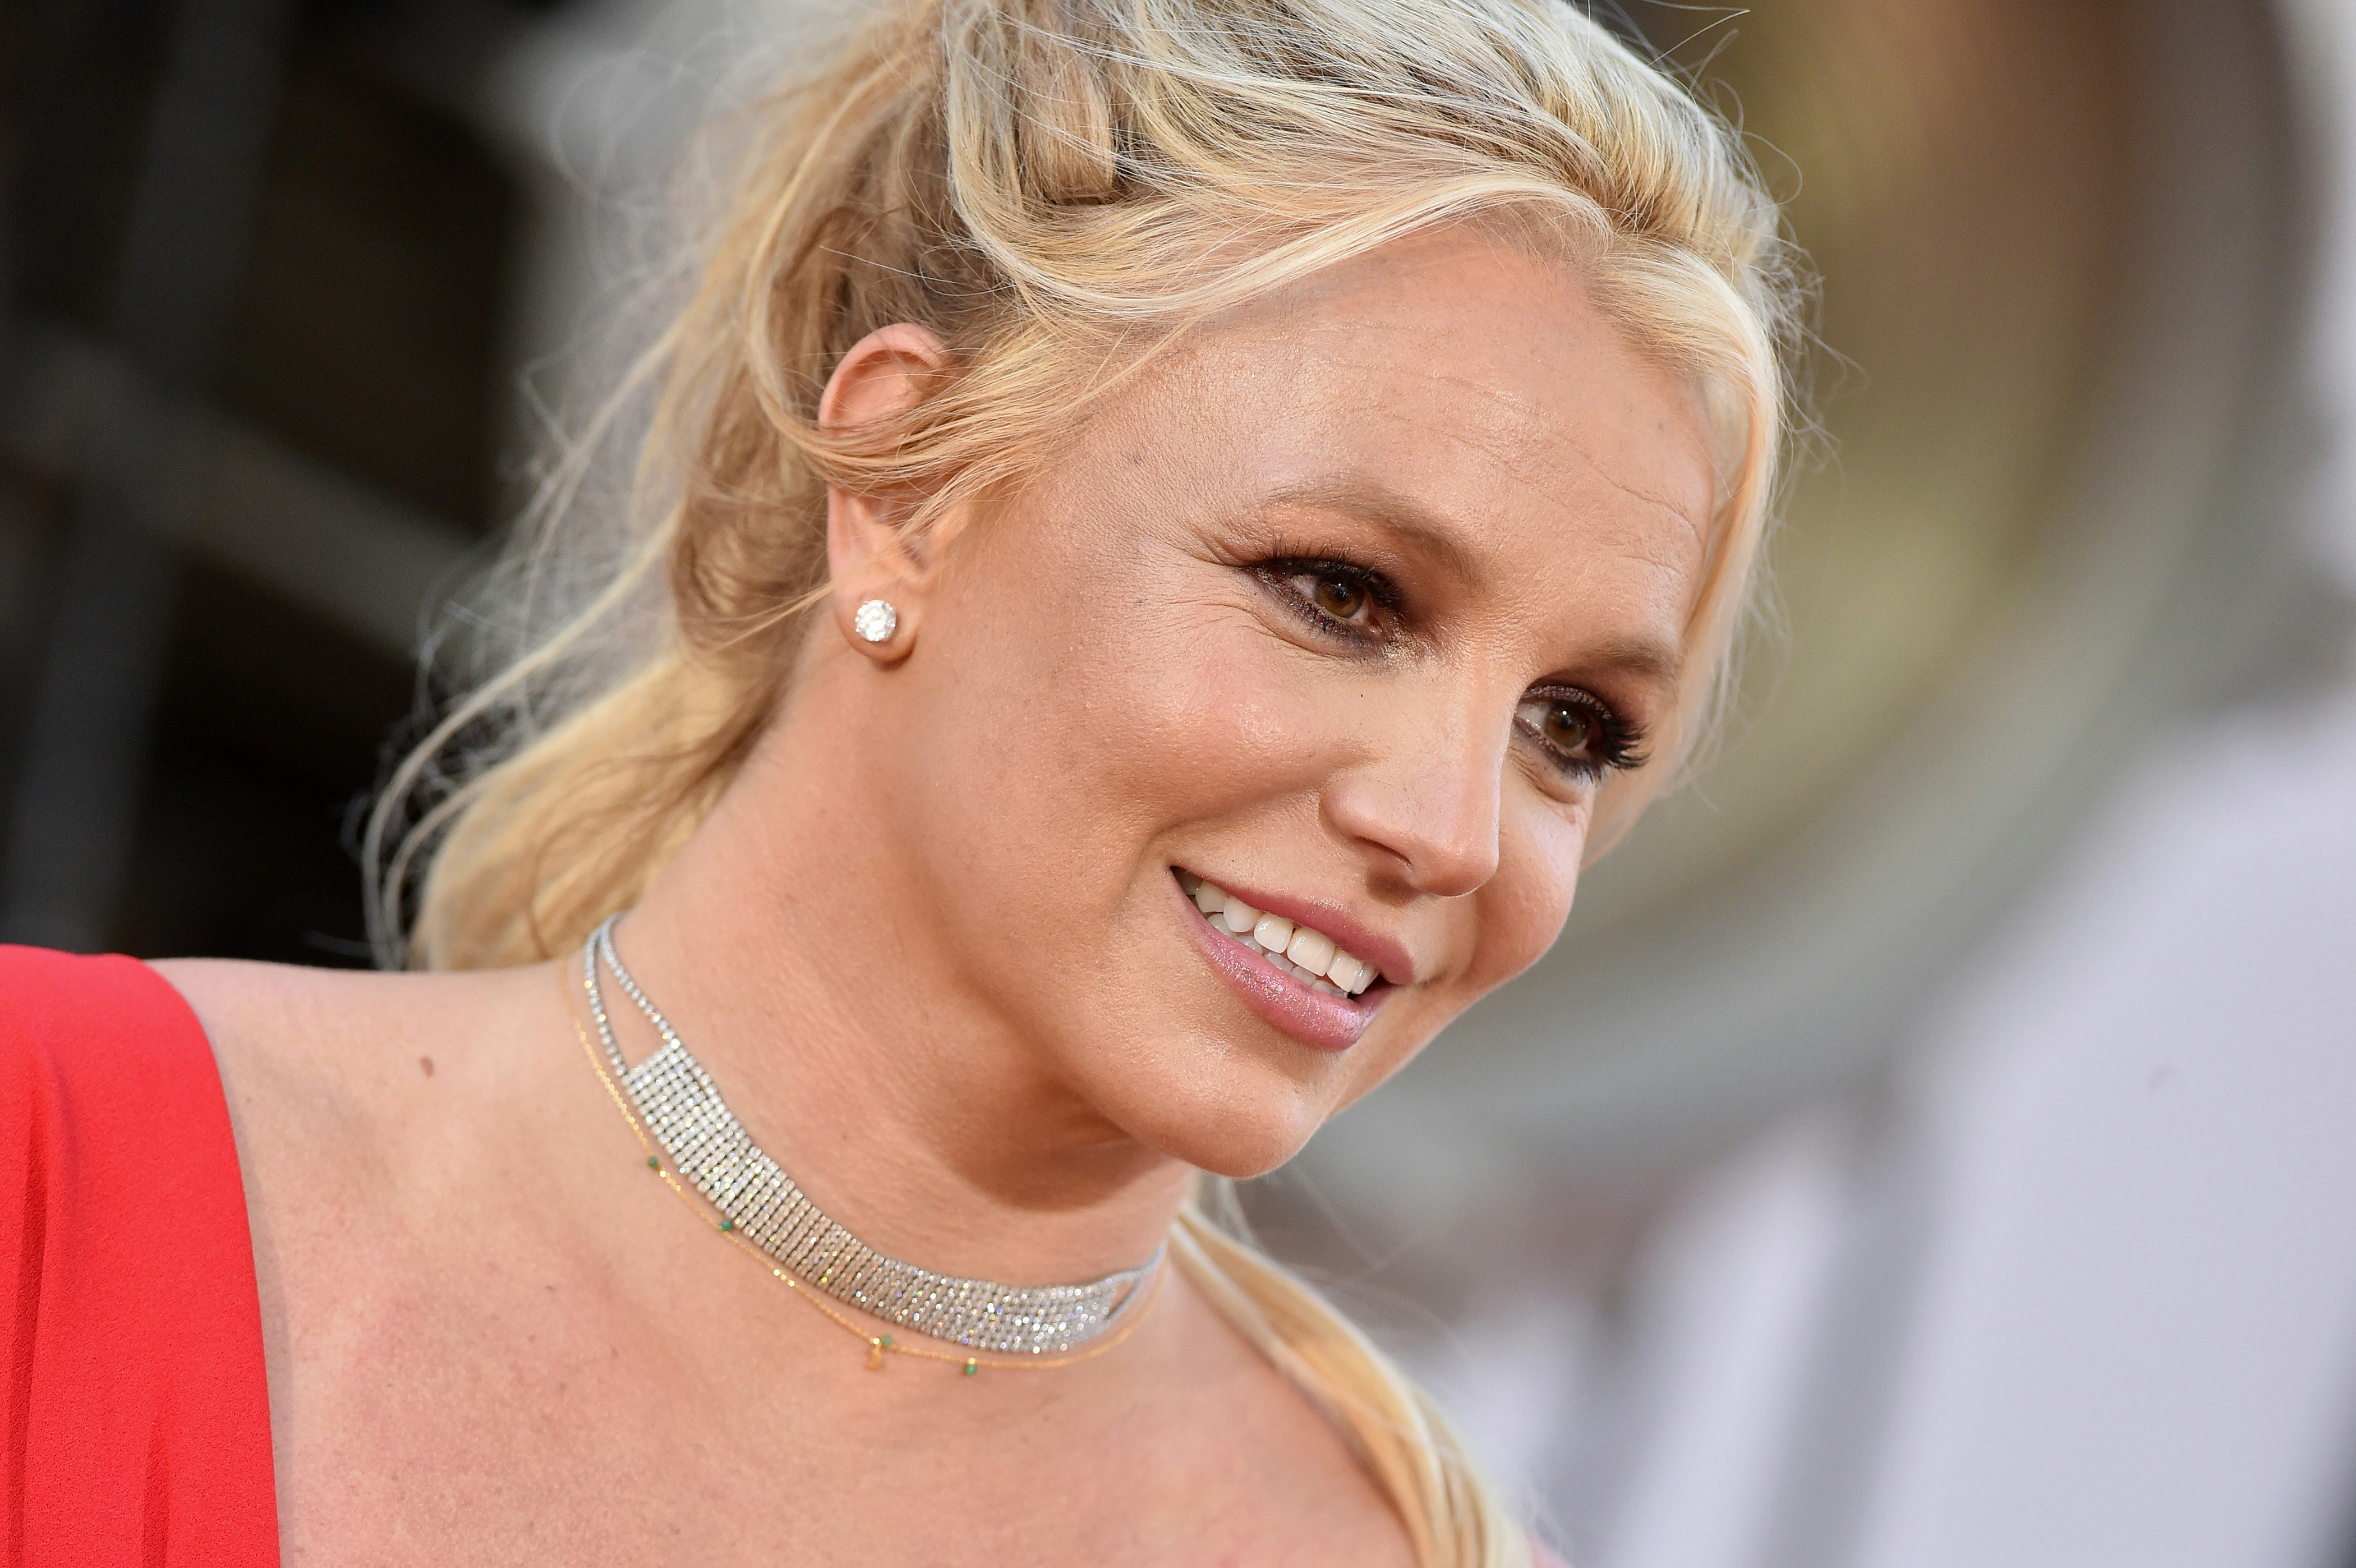 Bare Pussy Alyssa Milano - Britney Spears Isn't 'Crazy' For Posting Nudes On Instagram | Life | Grazia